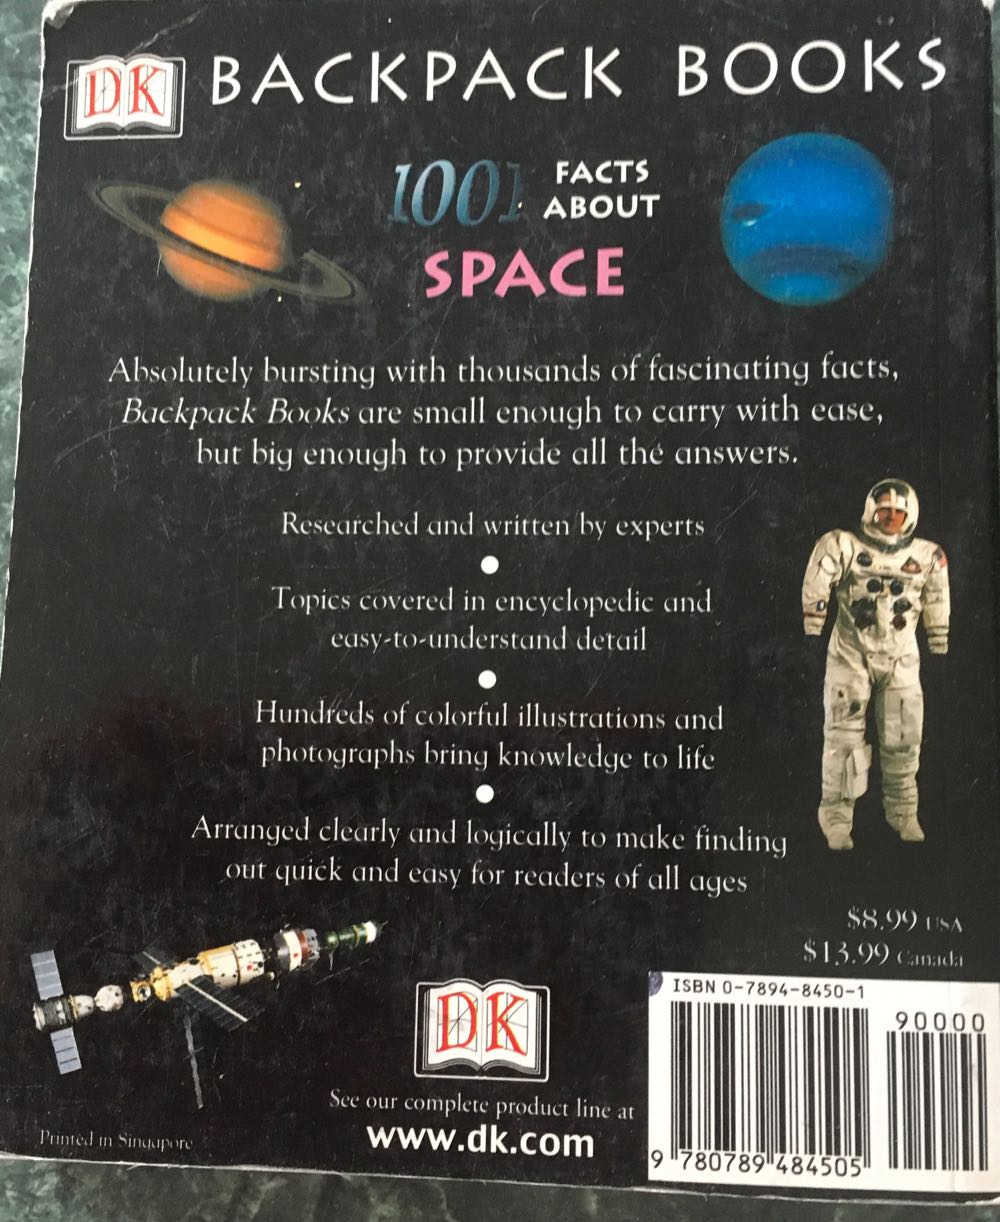 1,001 Facts About Space - Carole Stott (Dk Pub) book collectible [Barcode 9780789484505] - Main Image 2